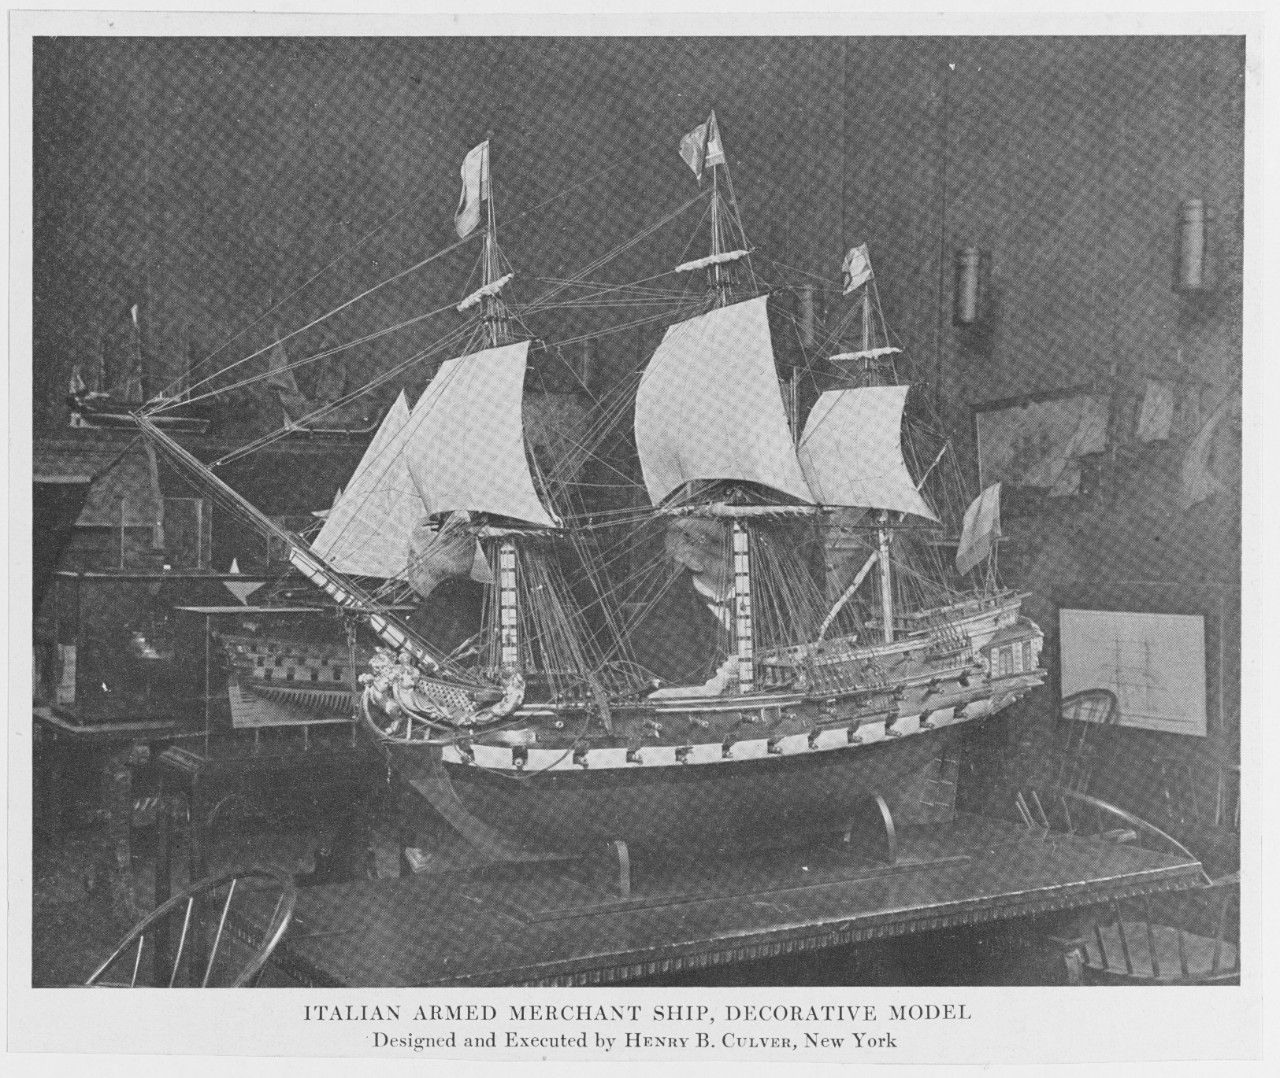 Model of Italian Armed Merchant Ship, decorative model. Designed and Executed by Henry B. Culver, New  York